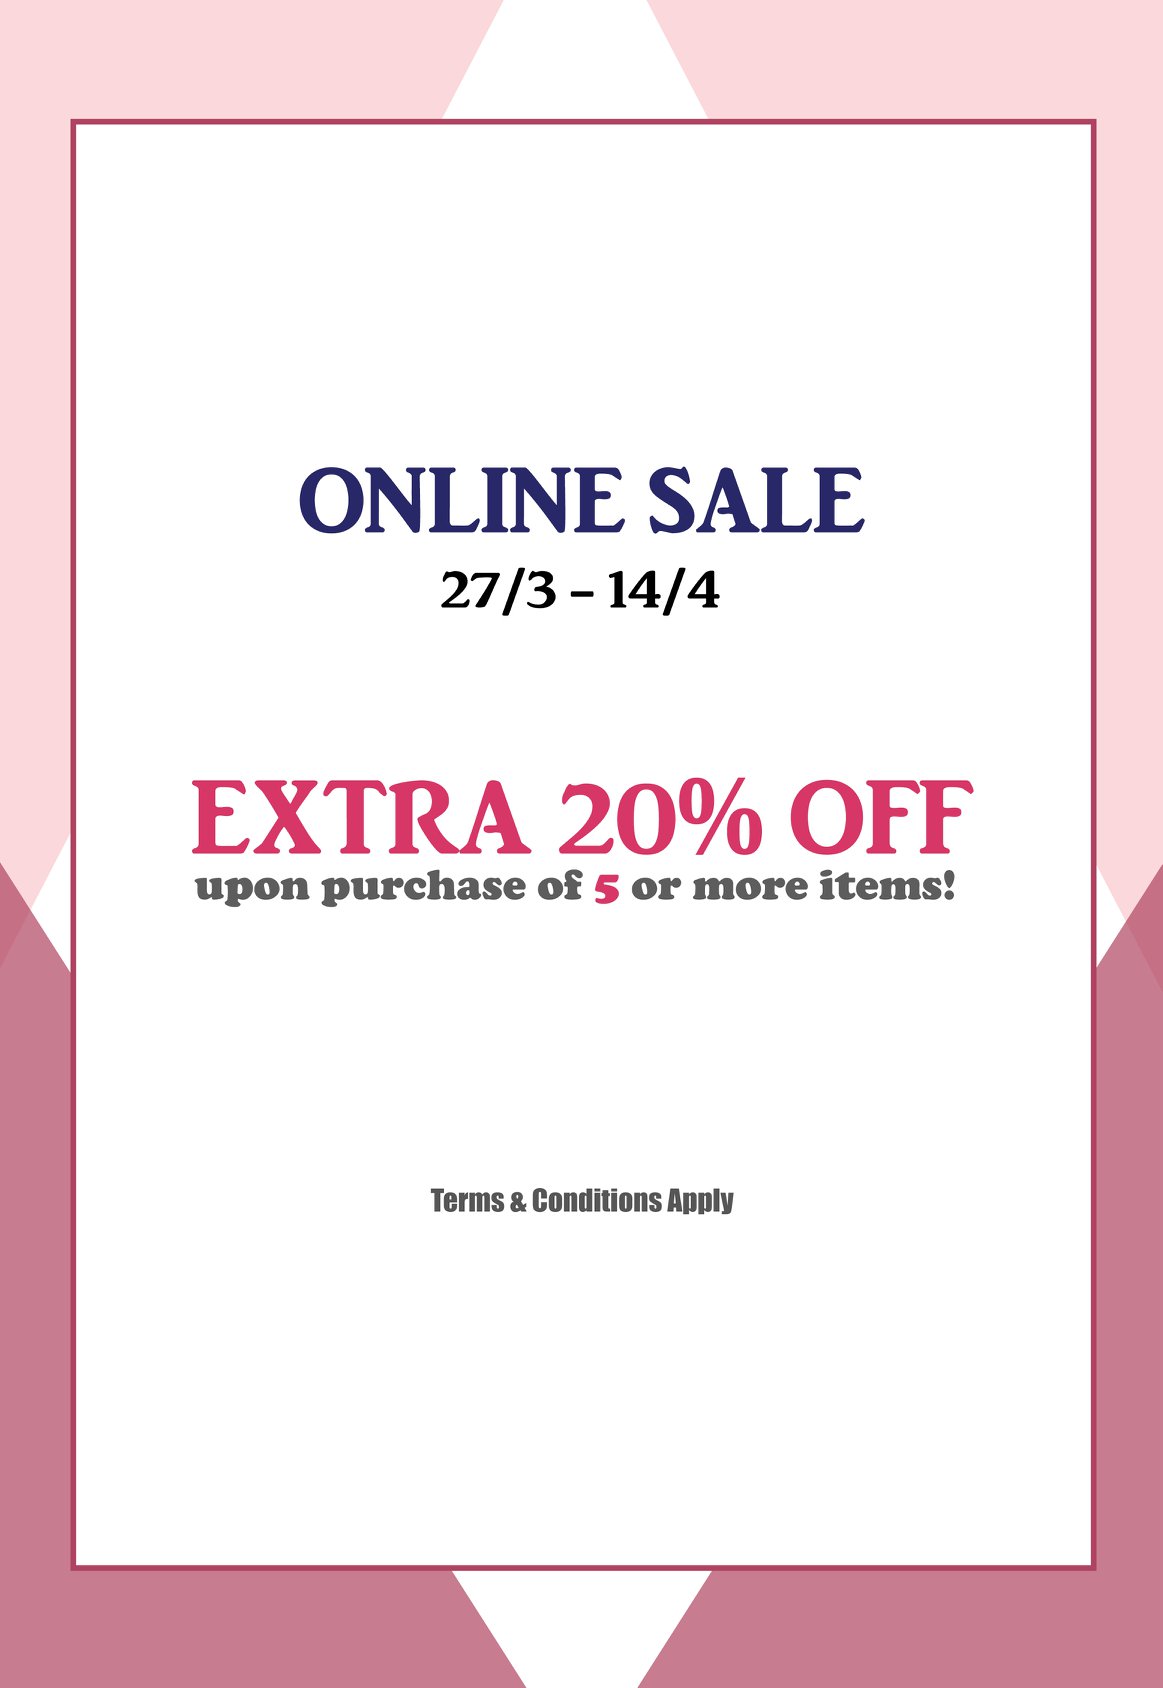 Exclusive online sale! Enjoy EXTRA 20% OFF upon purchase of 5 pcs or above (including discounted items) by entering the code "ADD20" before payment. Starting from today until 14 Apr and not to miss this special opportunity! 網店限時優惠！由即日起至4月14日，於ALEXANDRE ZOUARI網上商店選購五件或以上商品 (包括減價貨品)，於付款前輸入"ADD20" 優惠碼，即可享有額外八折優惠，請勿錯失良機！ For any updates of AZ:...